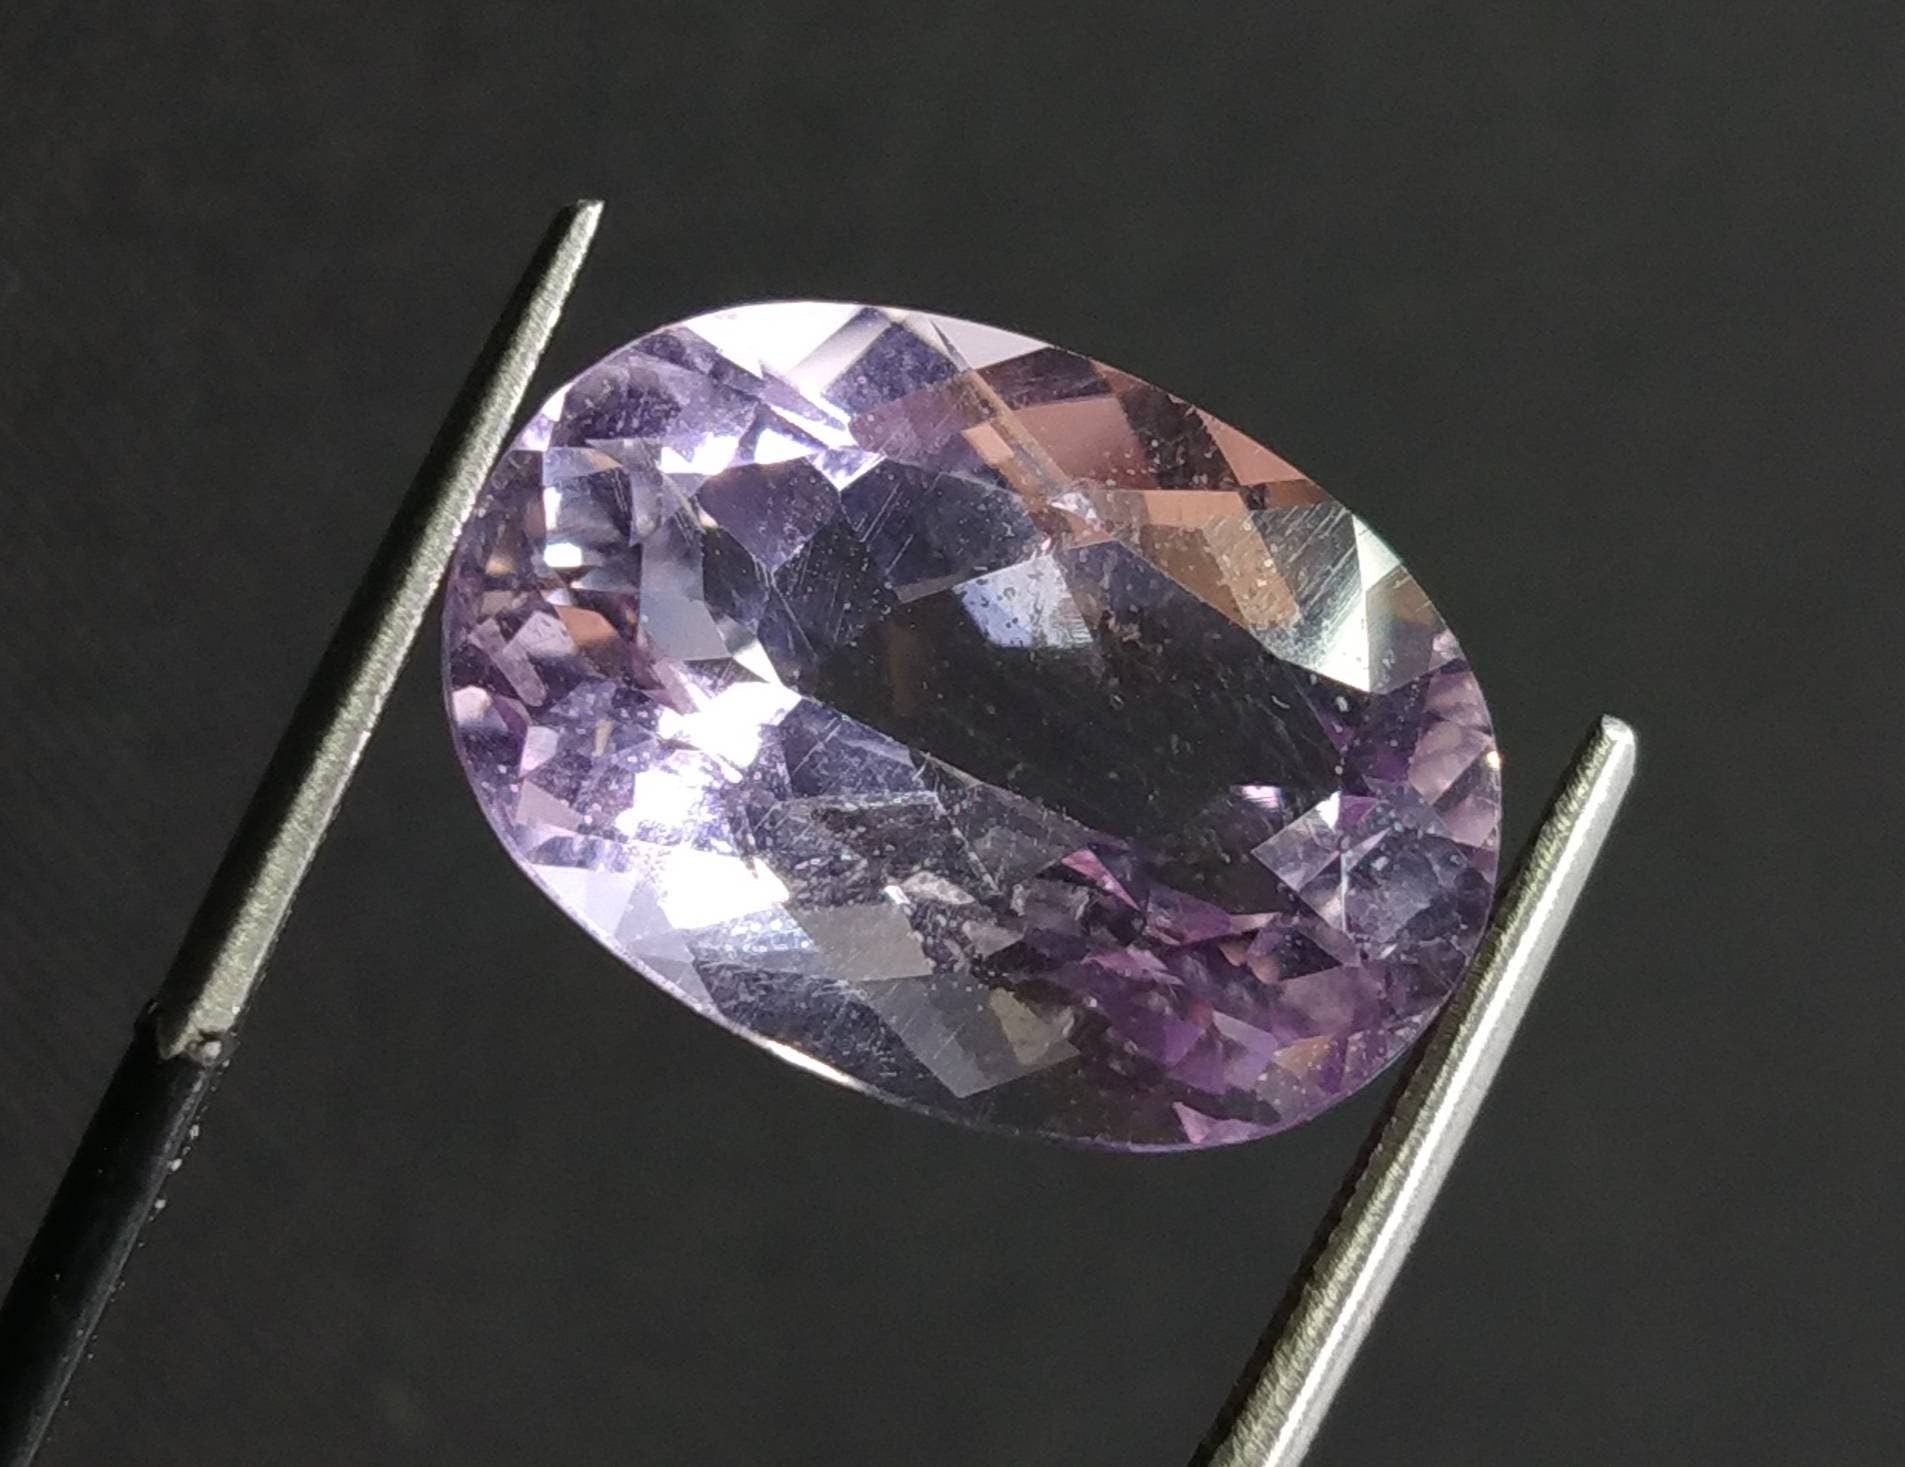 ARSAA GEMS AND MINERALSNatural top quality beautiful 8.5 carats VV clarity faceted oval shape kunzite gem - Premium  from ARSAA GEMS AND MINERALS - Just $27.00! Shop now at ARSAA GEMS AND MINERALS